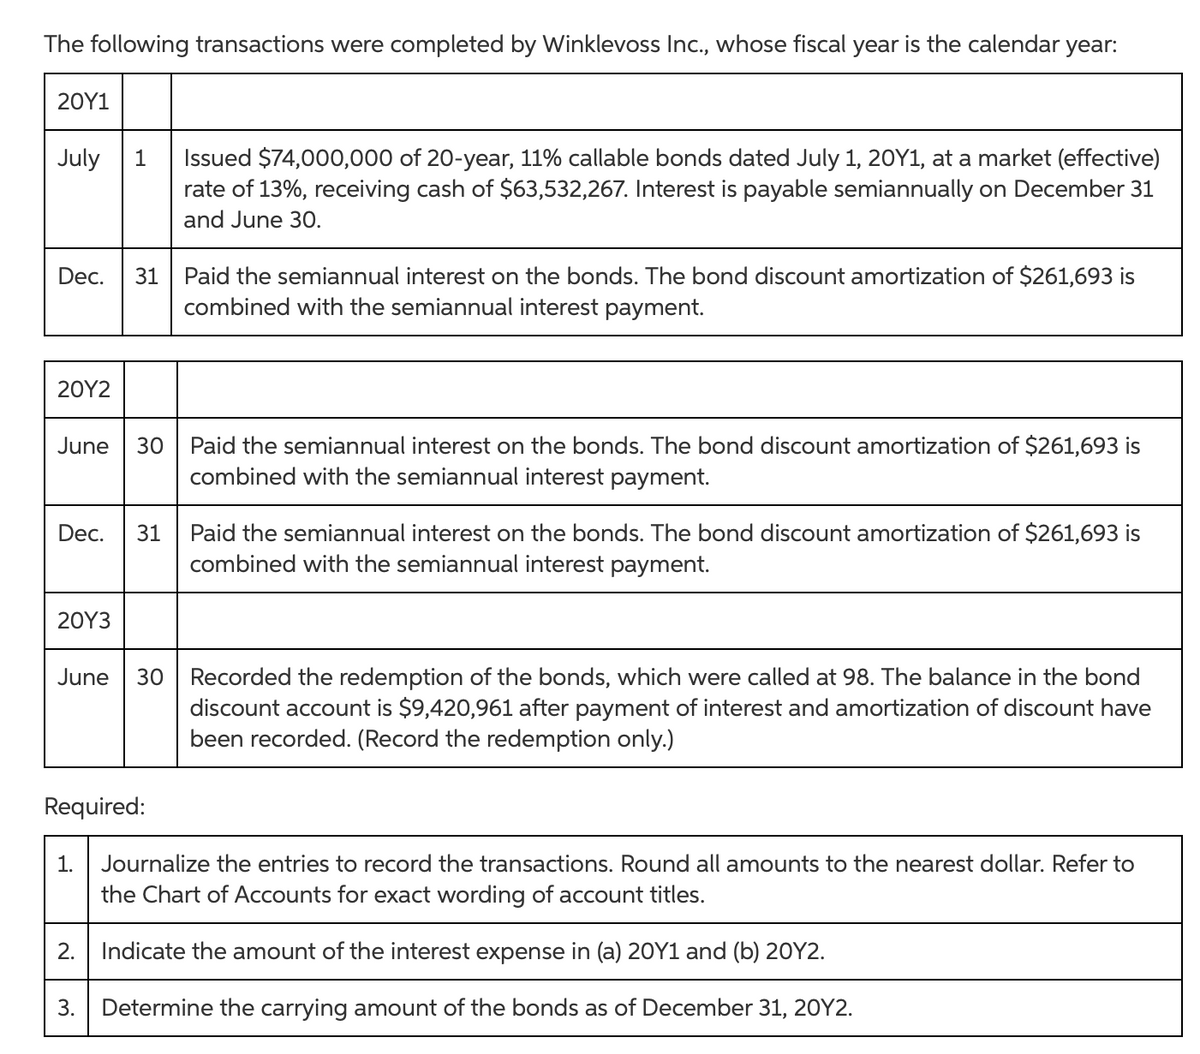 The following transactions were completed by Winklevoss Inc., whose fiscal year is the calendar year:
20Υ1
Issued $74,000,000 of 20-year, 11% callable bonds dated July 1, 20Y1, at a market (effective)
rate of 13%, receiving cash of $63,532,267. Interest is payable semiannually on December 31
and June 3O.
July
1
Paid the semiannual interest on the bonds. The bond discount amortization of $261,693 is
combined with the semiannual interest payment.
Dec.
31
20Υ2
Paid the semiannual interest on the bonds. The bond discount amortization of $261,693 is
combined with the semiannual interest payment.
June
30
Paid the semiannual interest on the bonds. The bond discount amortization of $261,693 is
combined with the semiannual interest payment.
Dec.
31
20Y3
30 Recorded the redemption of the bonds, which were called at 98. The balance in the bond
discount account is $9,420,961 after payment of interest and amortization of discount have
been recorded. (Record the redemption only.)
June
Required:
1.
Journalize the entries to record the transactions. Round all amounts to the nearest dollar. Refer to
the Chart of Accounts for exact wording of account titles.
2.
Indicate the amount of the interest expense in (a) 20Y1 and (b) 20Y2.
3.
Determine the carrying amount of the bonds as of December 31, 20Y2.
